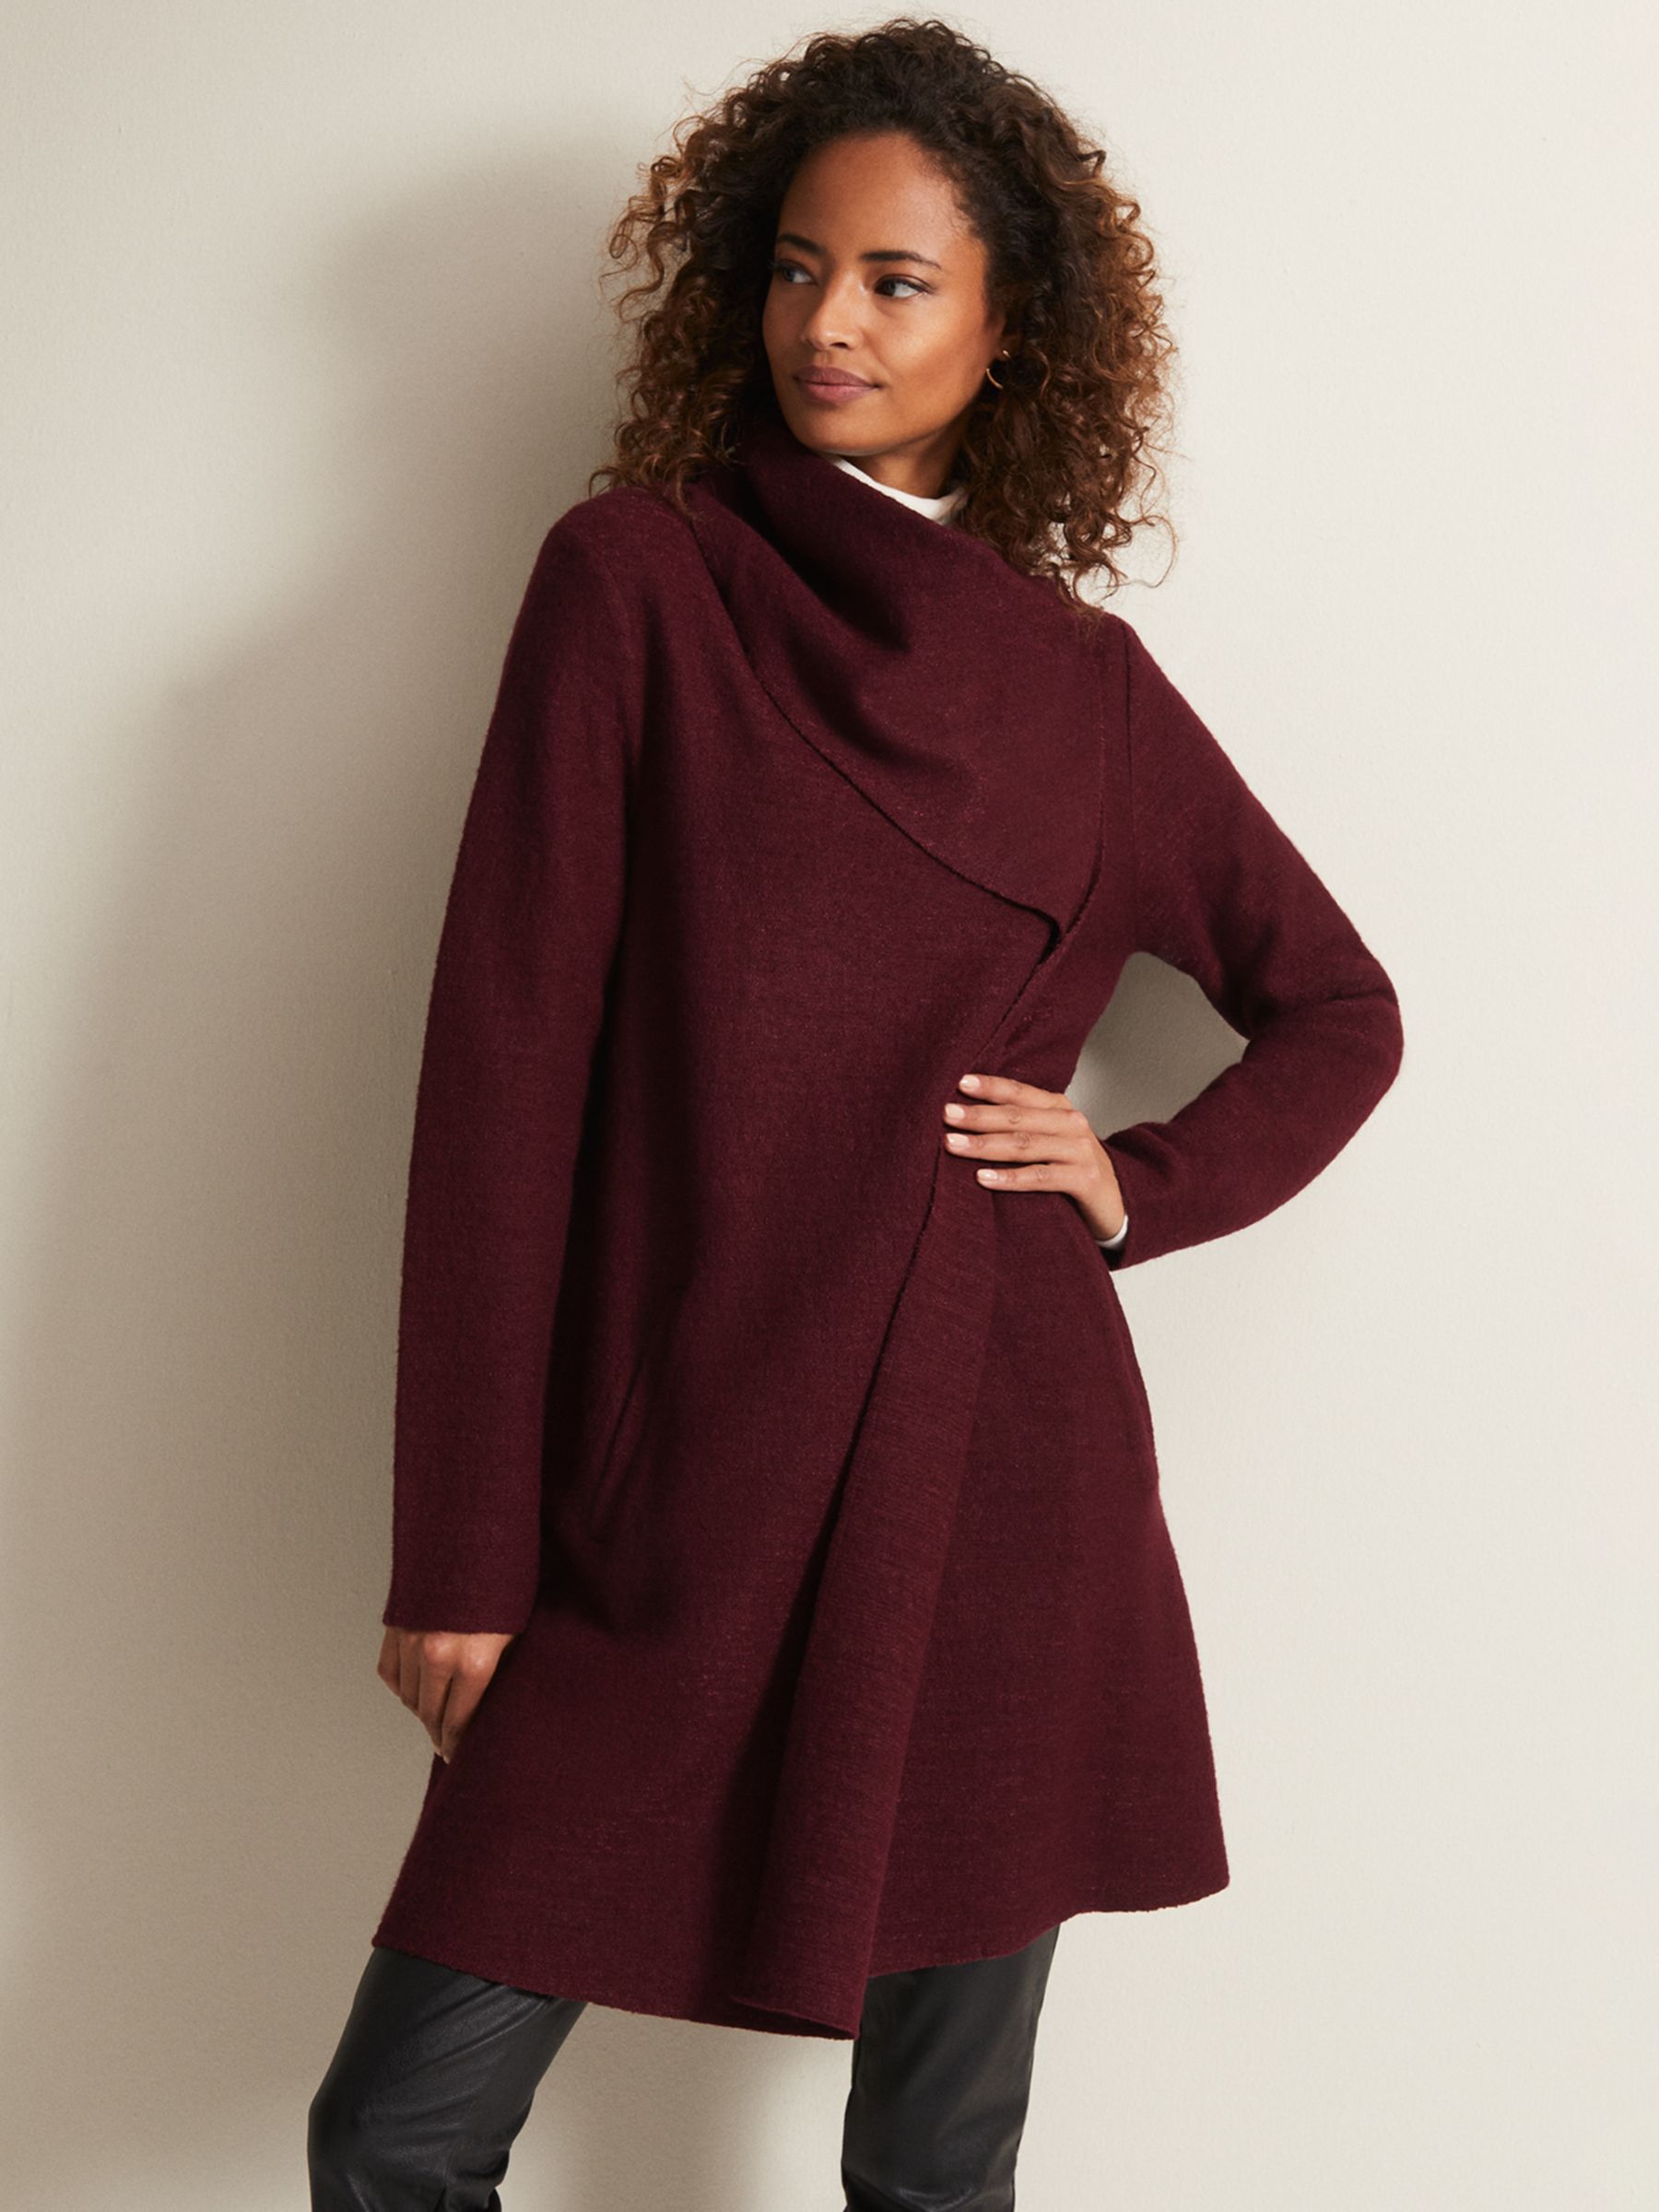 Buy Phase Eight Bellona Knit Coat Online at johnlewis.com